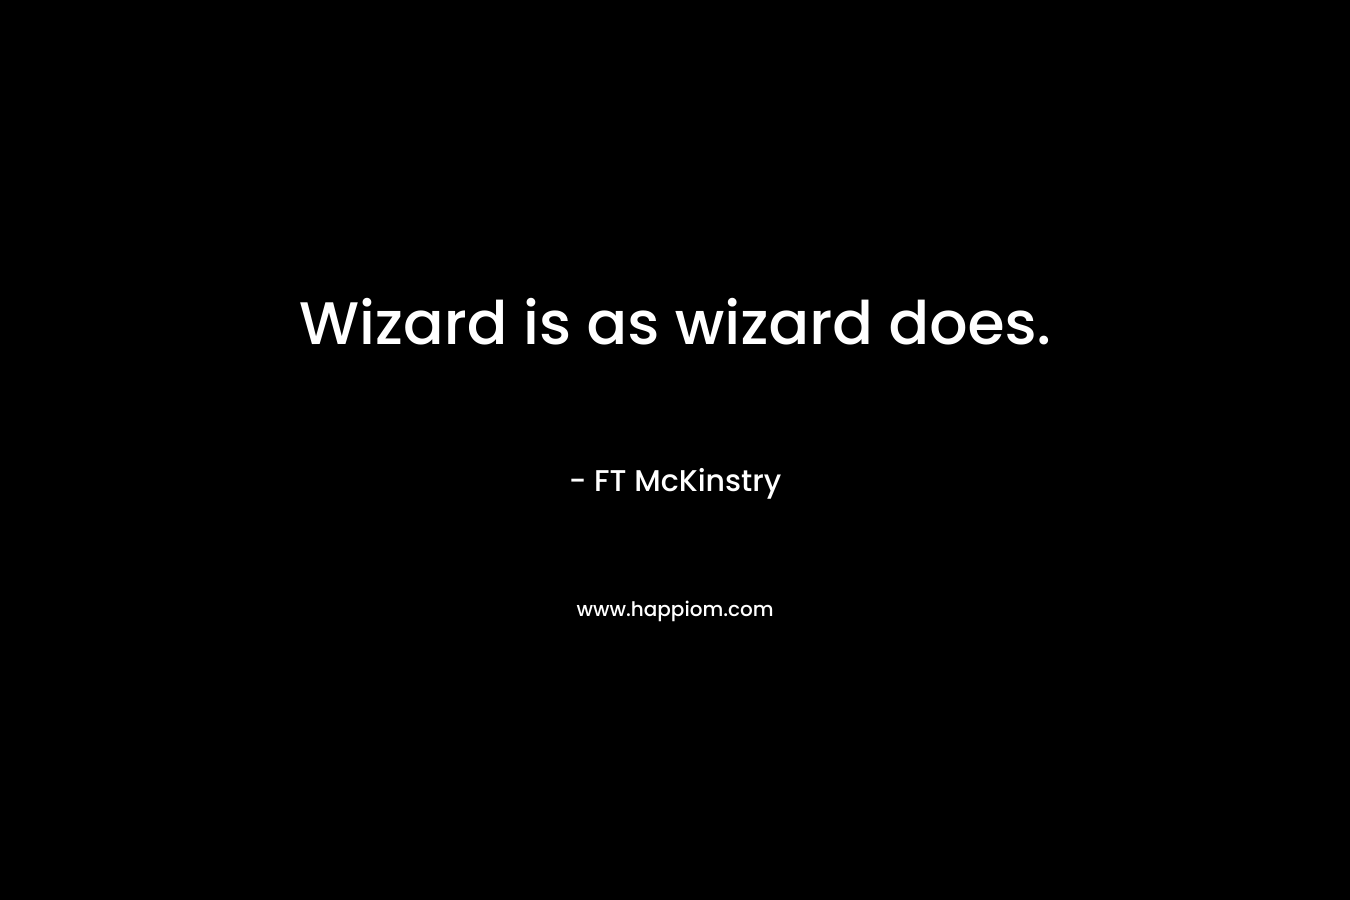 Wizard is as wizard does. – FT McKinstry